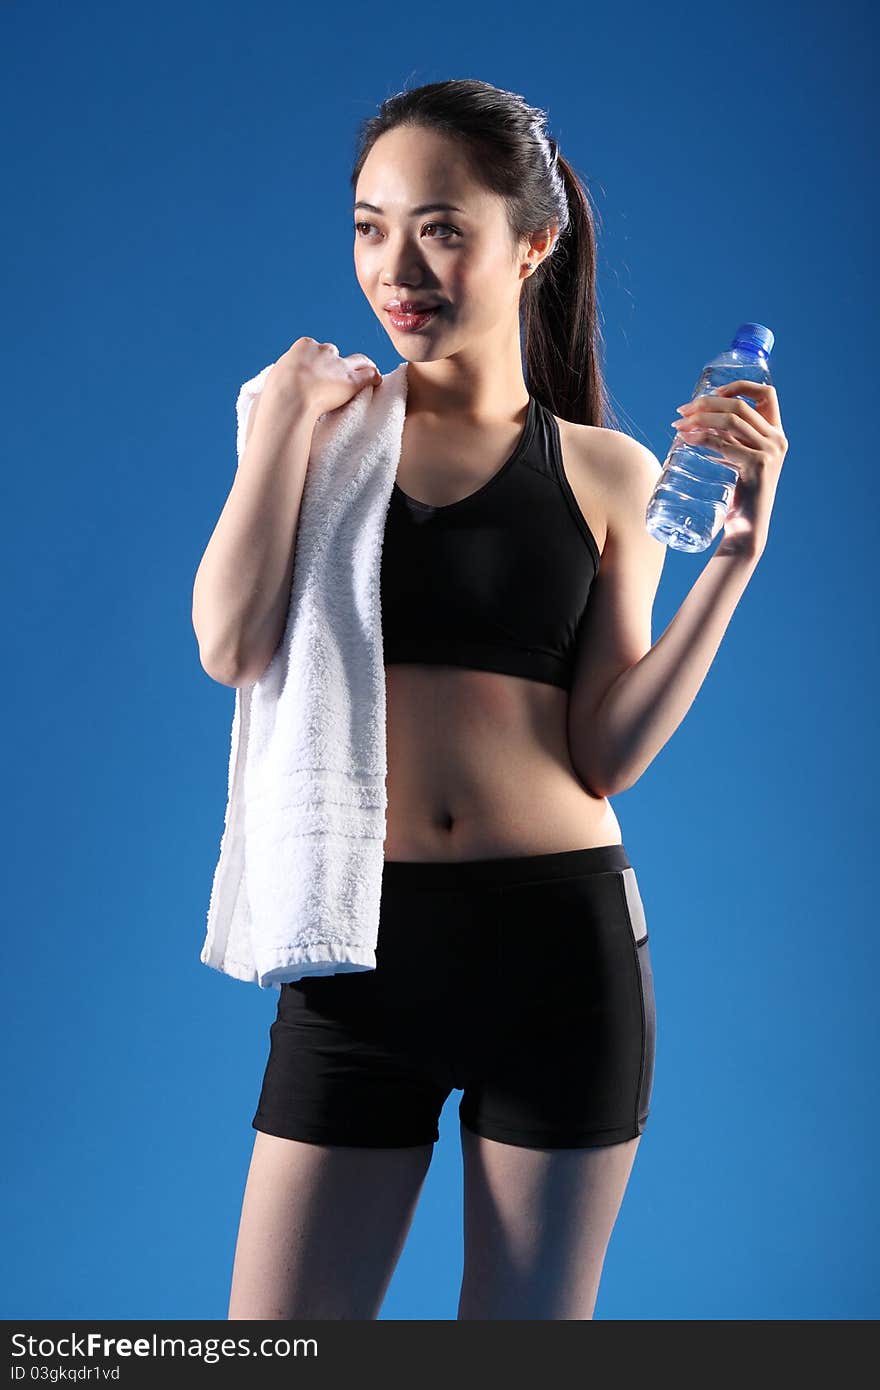 Happy and relaxed after a fitness workout, a beautiful Chinese Asian girl wearing a black sports outfit, standing with bottled water and a towel. Happy and relaxed after a fitness workout, a beautiful Chinese Asian girl wearing a black sports outfit, standing with bottled water and a towel.